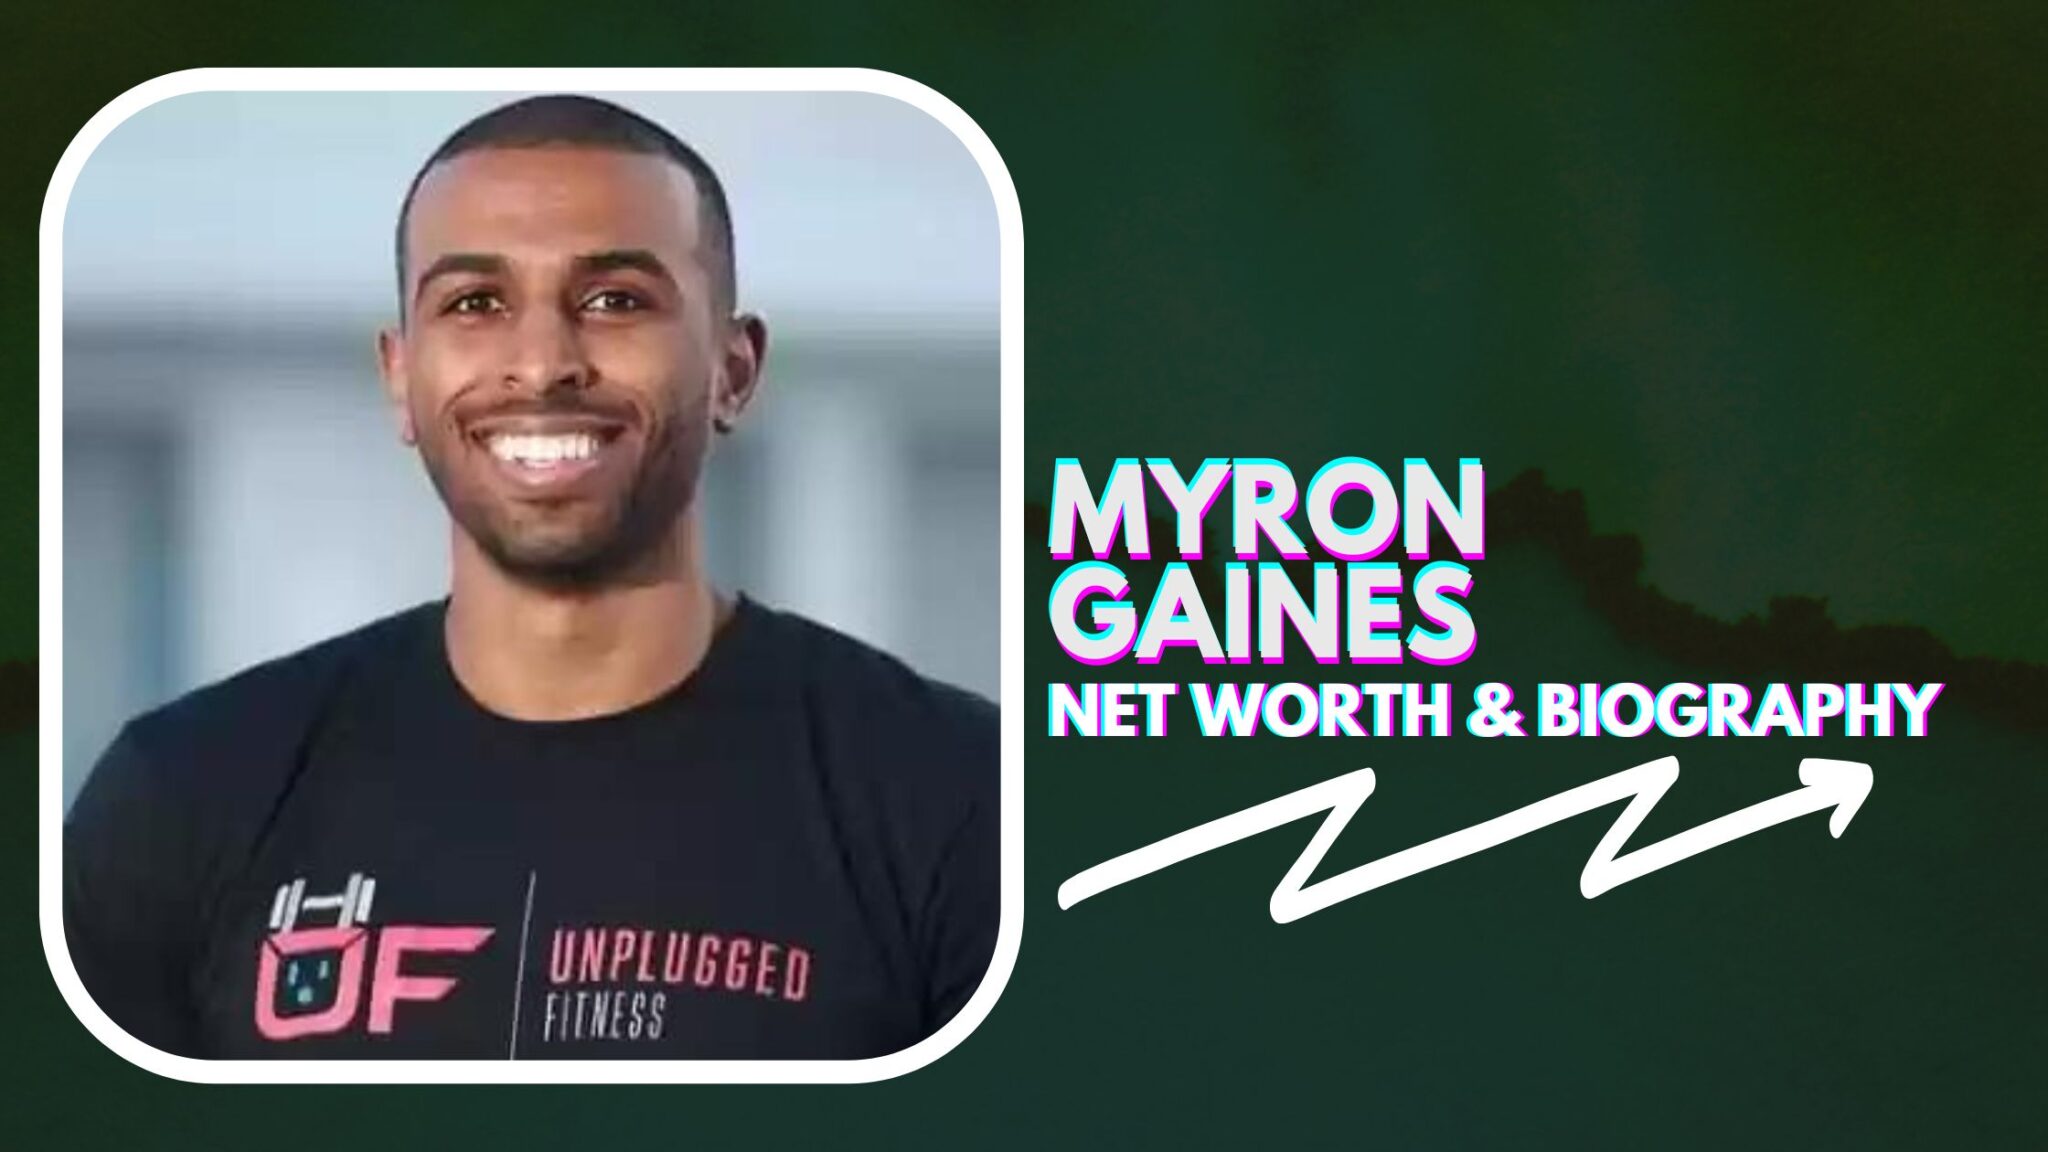 Myron Gaines Biography, Career, and Net Worth